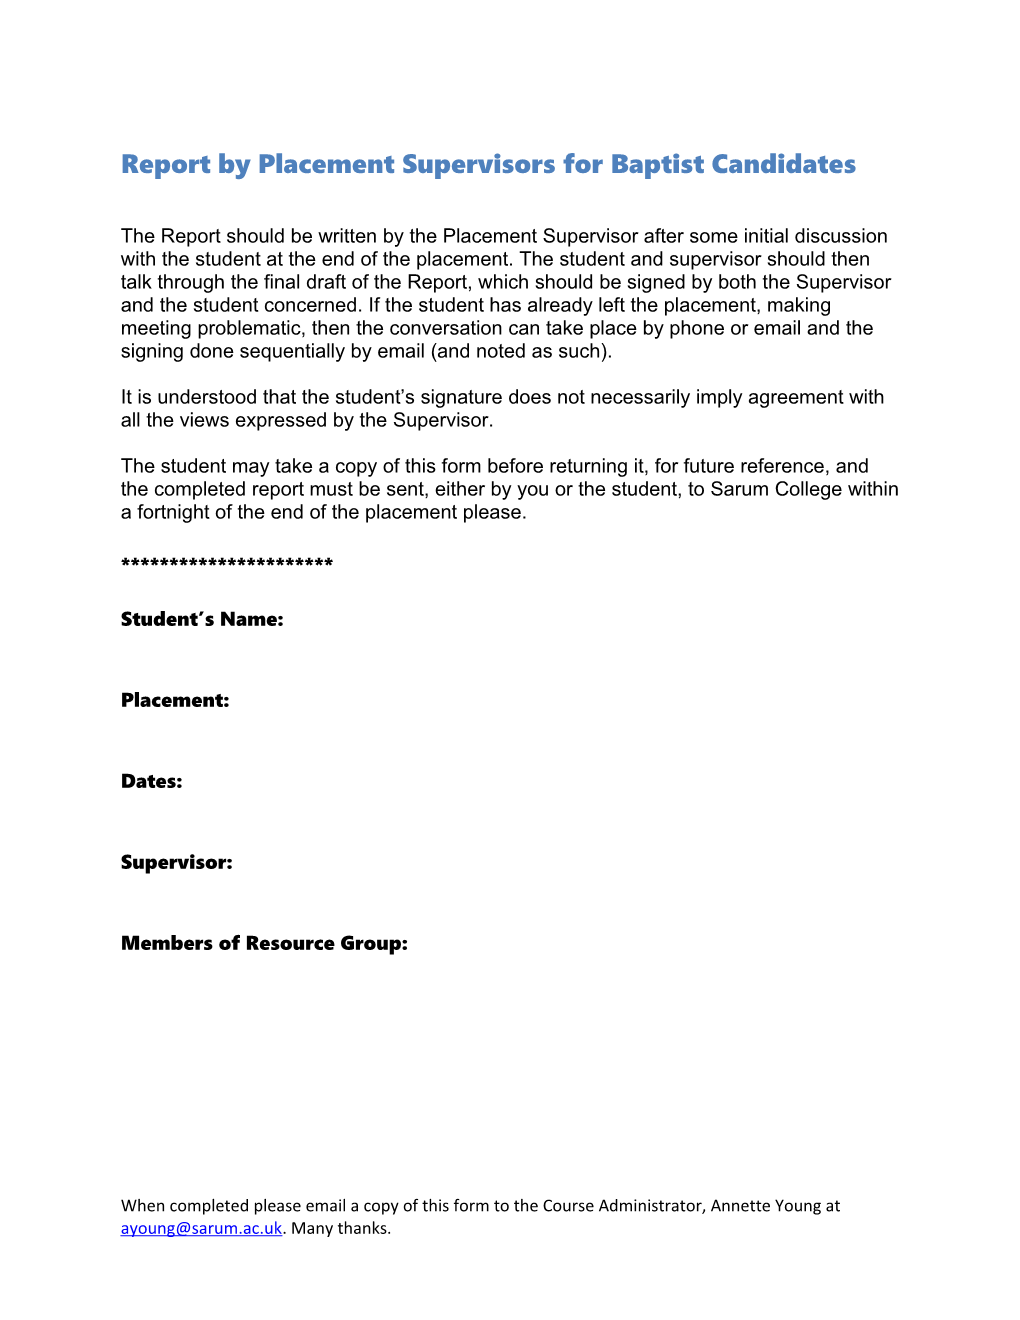 Report by Placement Supervisors for Baptist Candidates